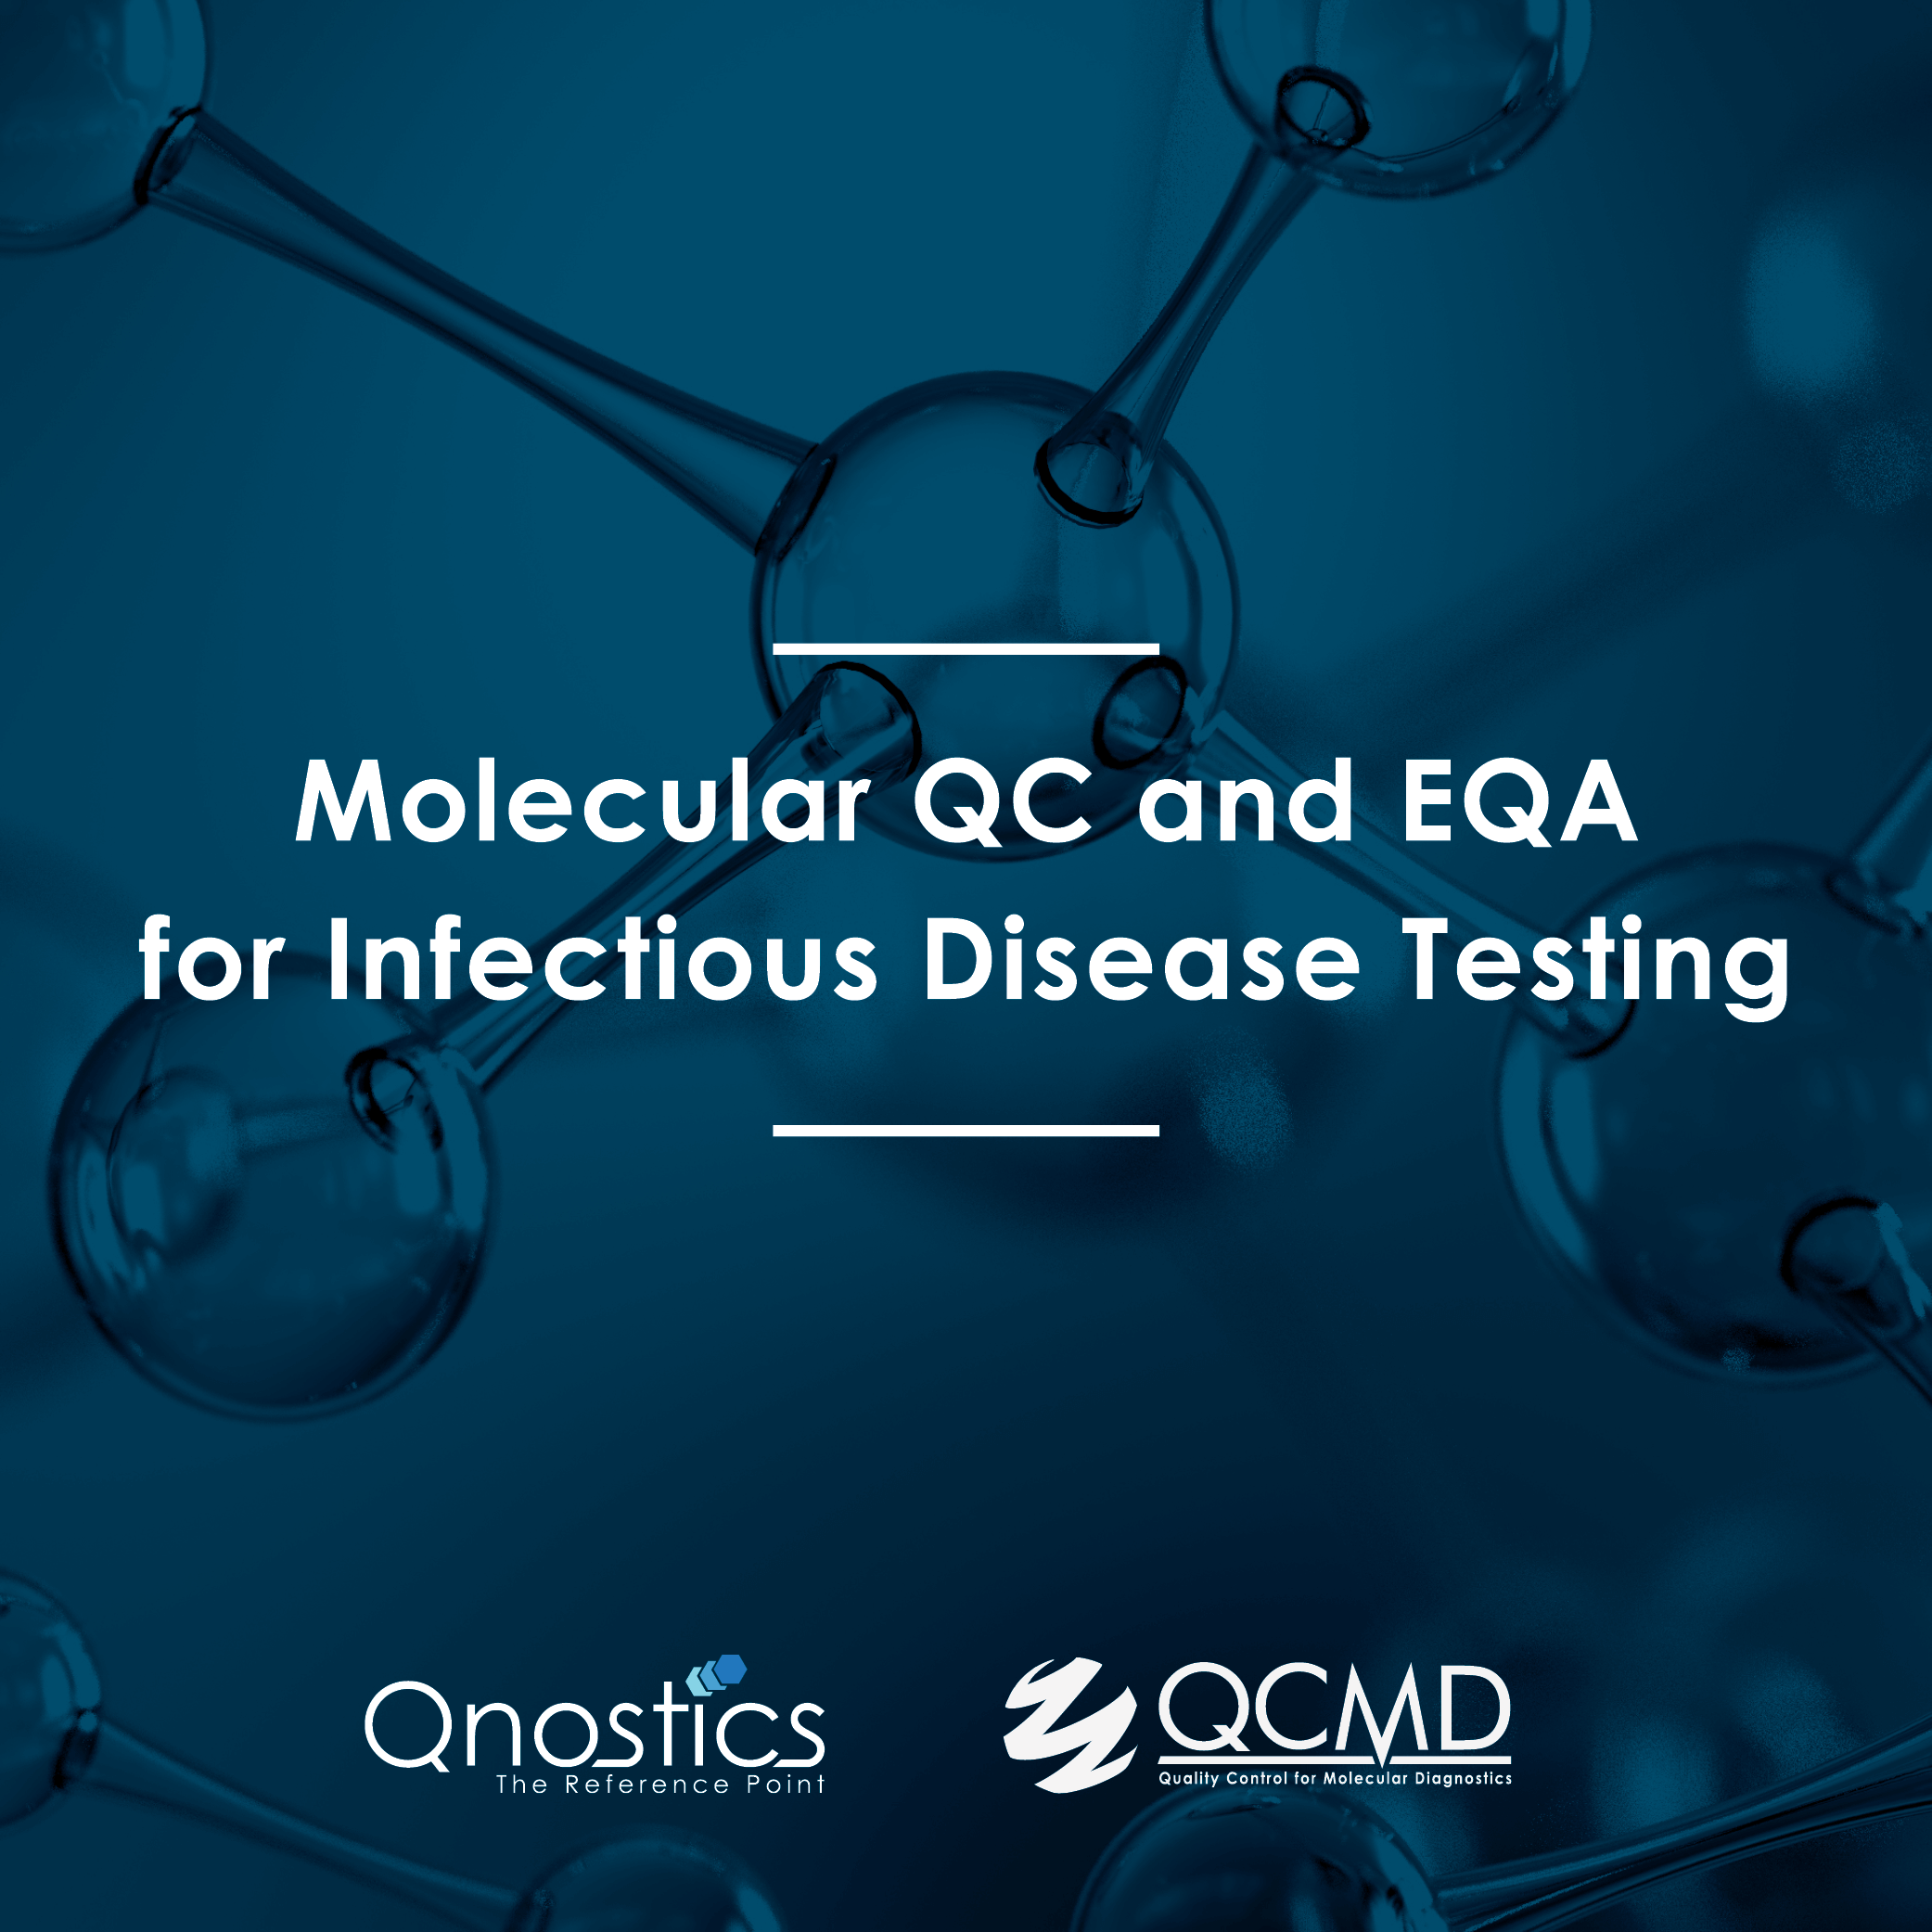 Molecular QC and EQA for Infectious Disease Testing